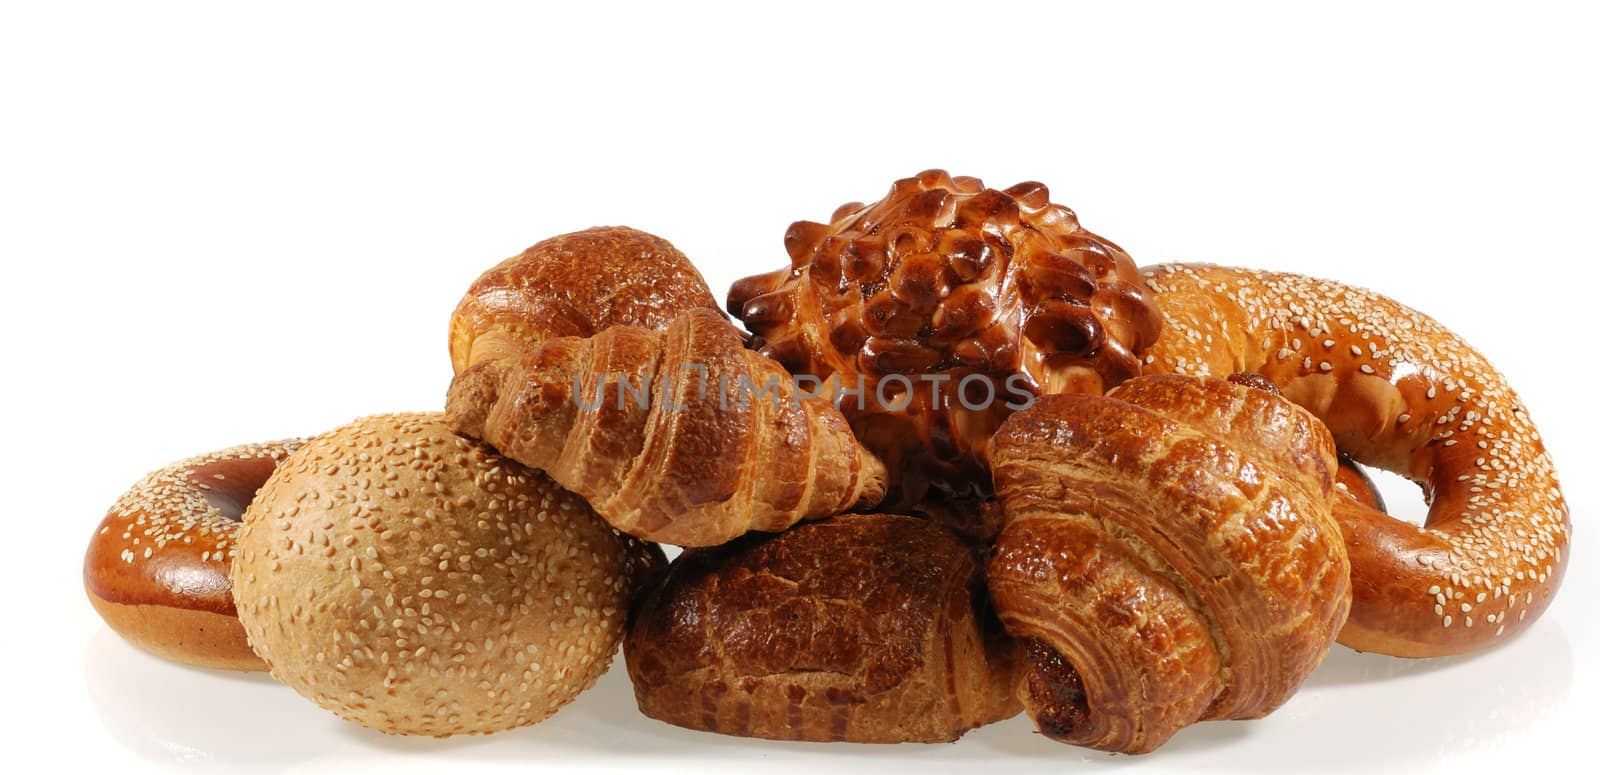 isolated, bun, brown, organic, macro, healthy, bakery, bread, loaf, baked, food, eating, freshness, meal, slice, bagel, white, snack, culture, yellow, products, breakfast, wheat, dieting, gourmet, focaccia, baking, sesame, abundance, close-up, seed, group, color, objects, backgrounds, carbohydrate